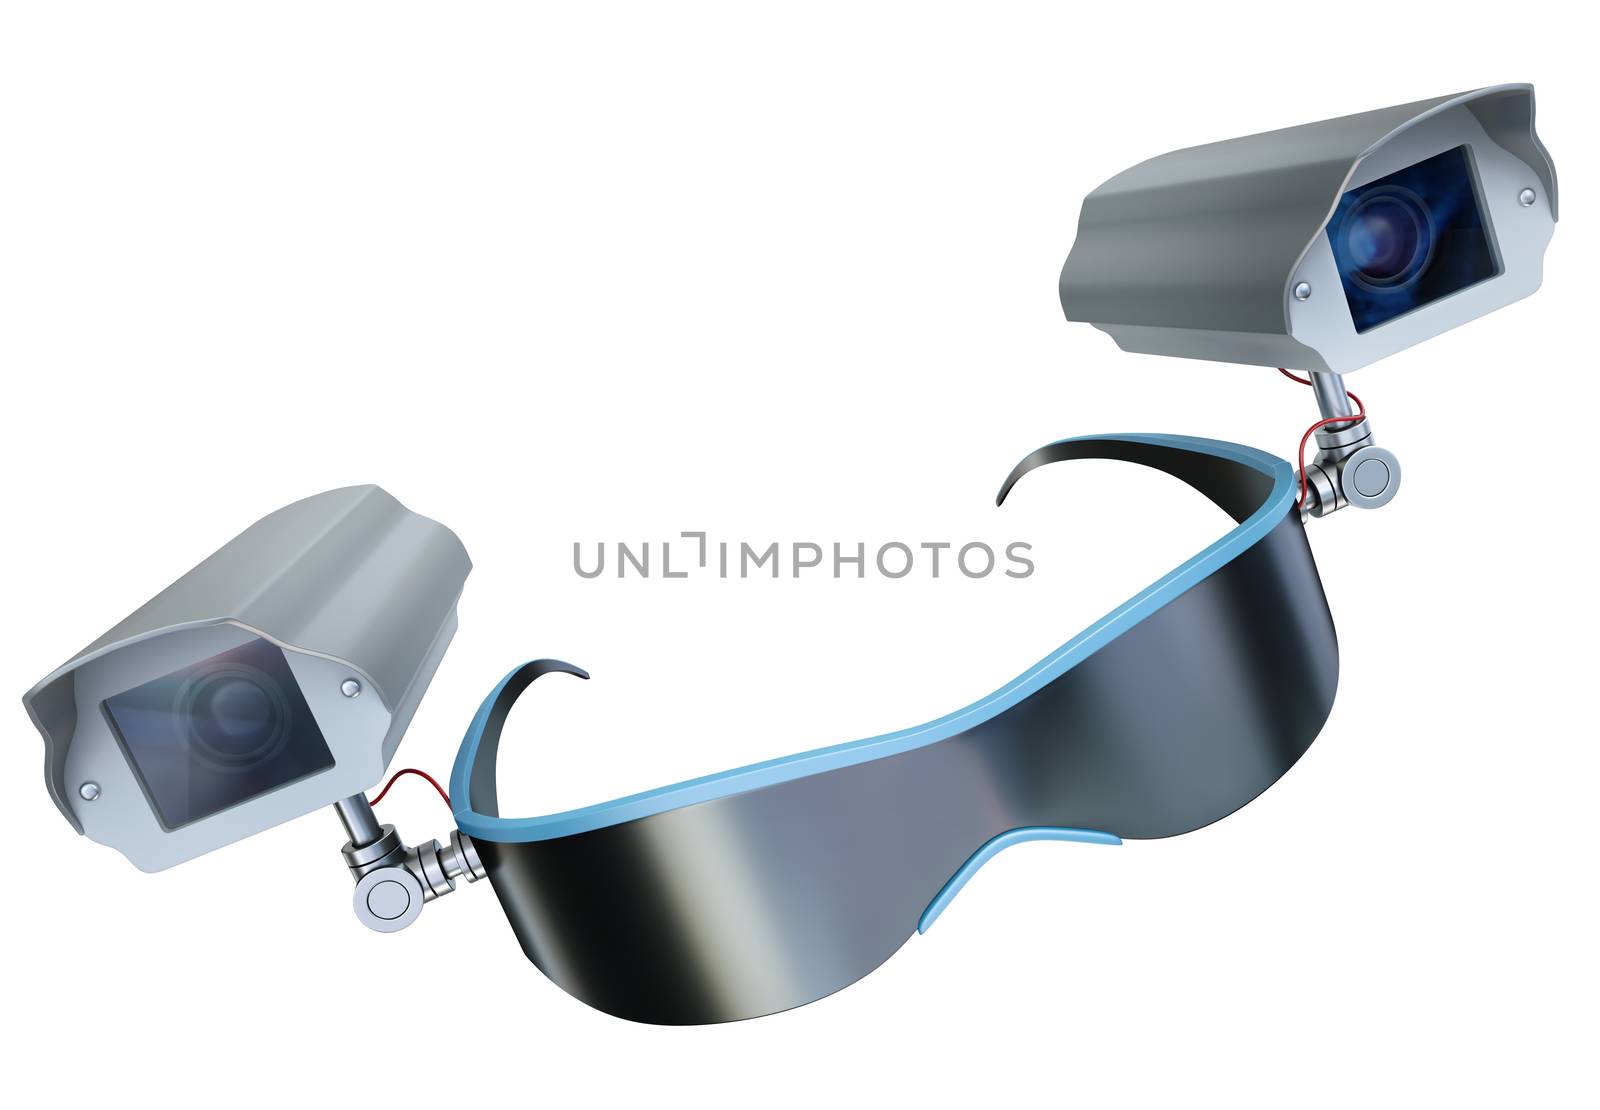 Sunglasses with CCTV cameras - modern gadgets as surveillance devices metaphor. 3D rendered illustration.